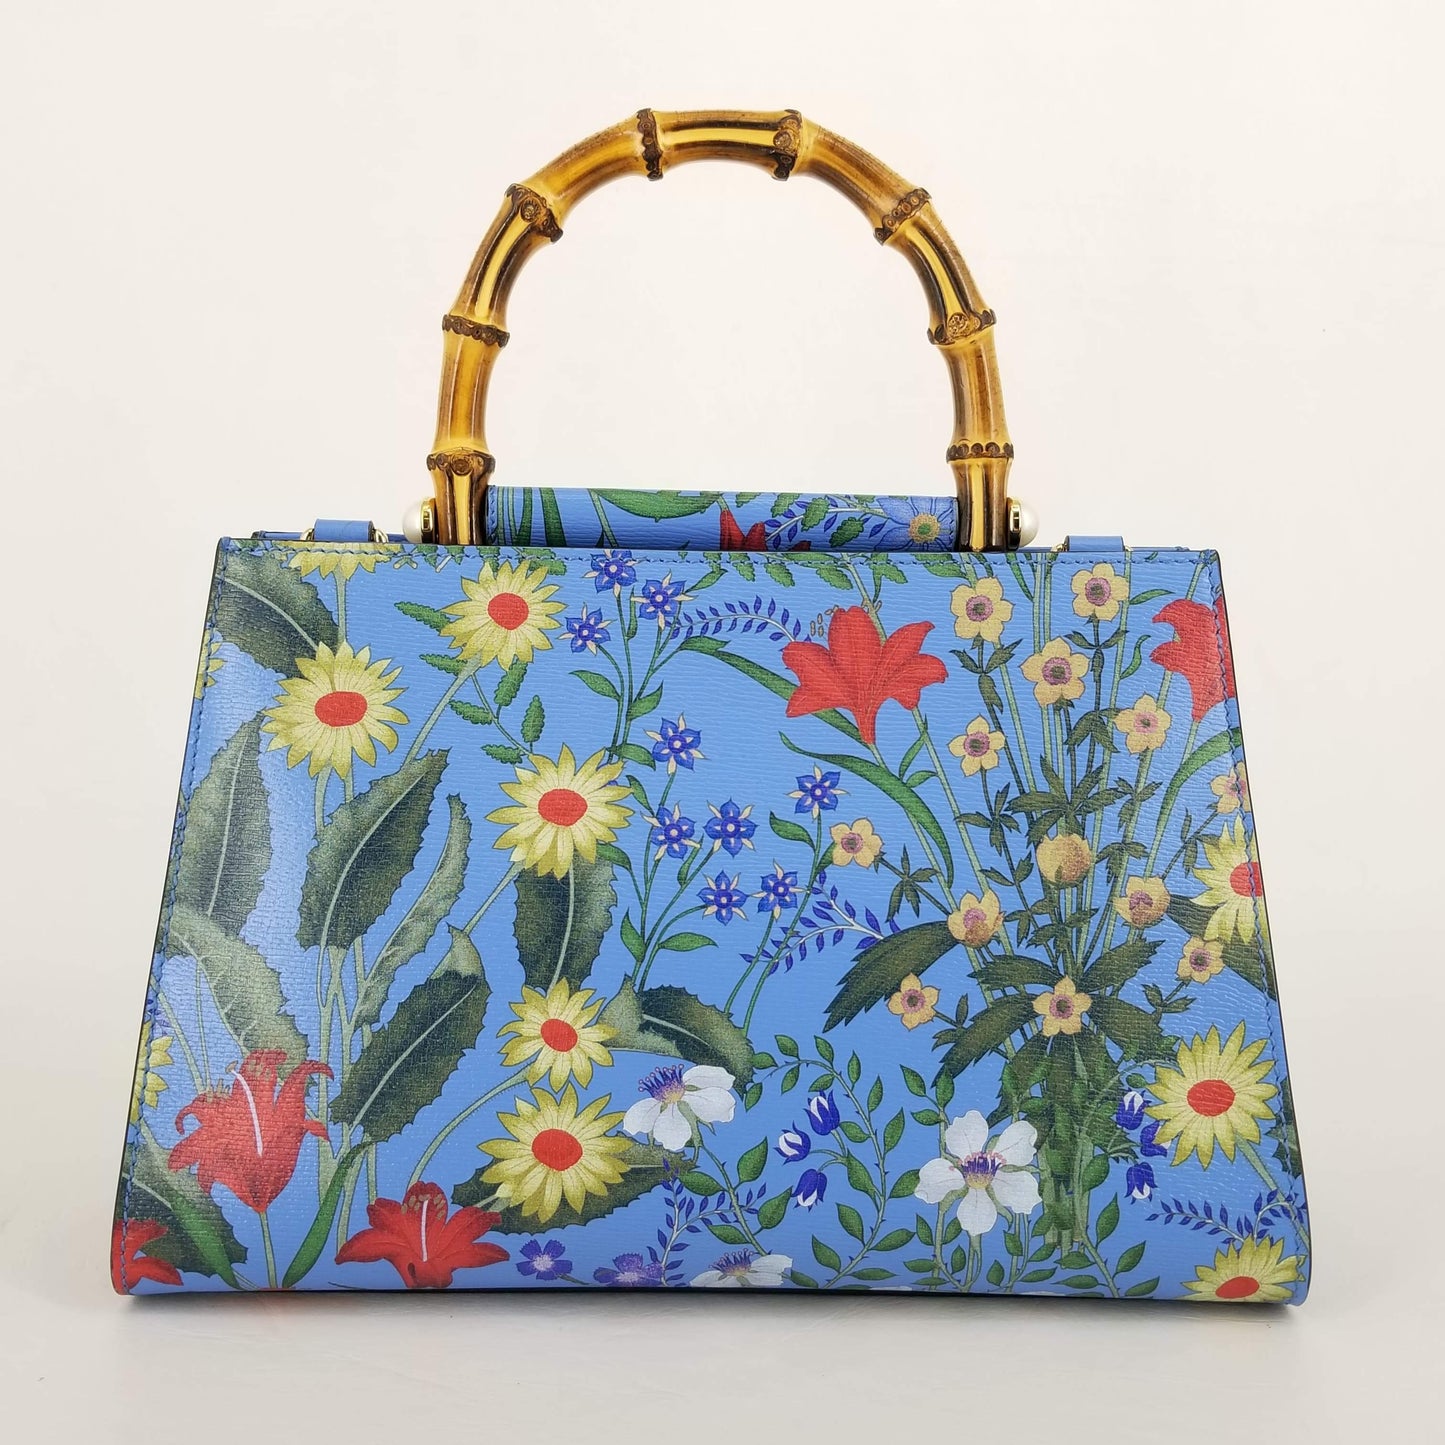 Authentic Gucci Blue Nymphaea Floral Bamboo Bag